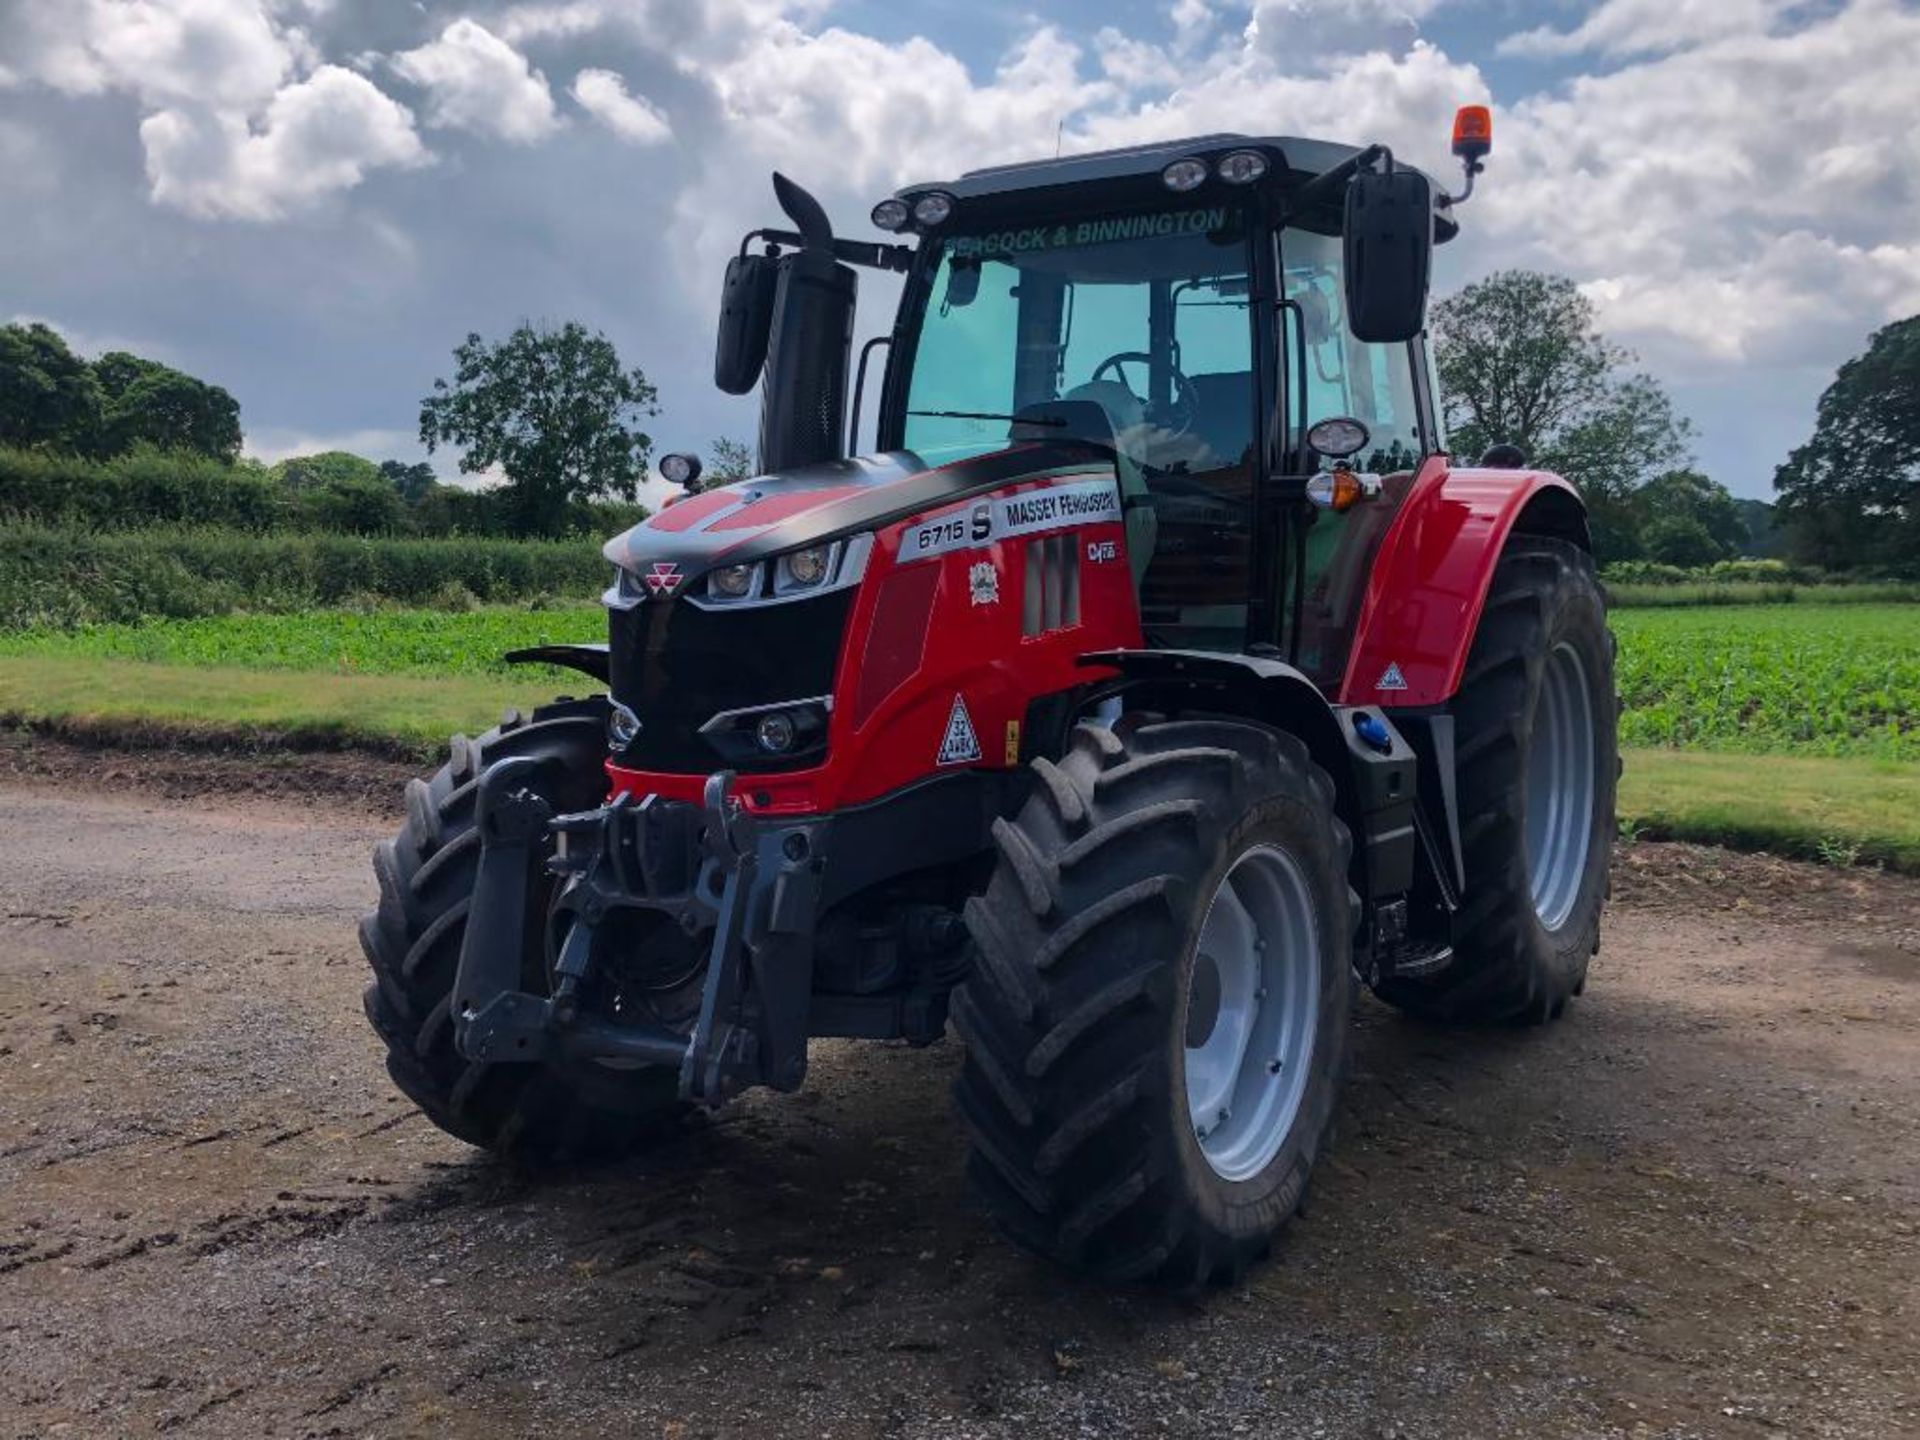 2019 Massey Ferguson 6715 S Dyna 6 50kph 4wd tractor c/w 3 manual spools, front linkage, air brakes, - Image 21 of 41